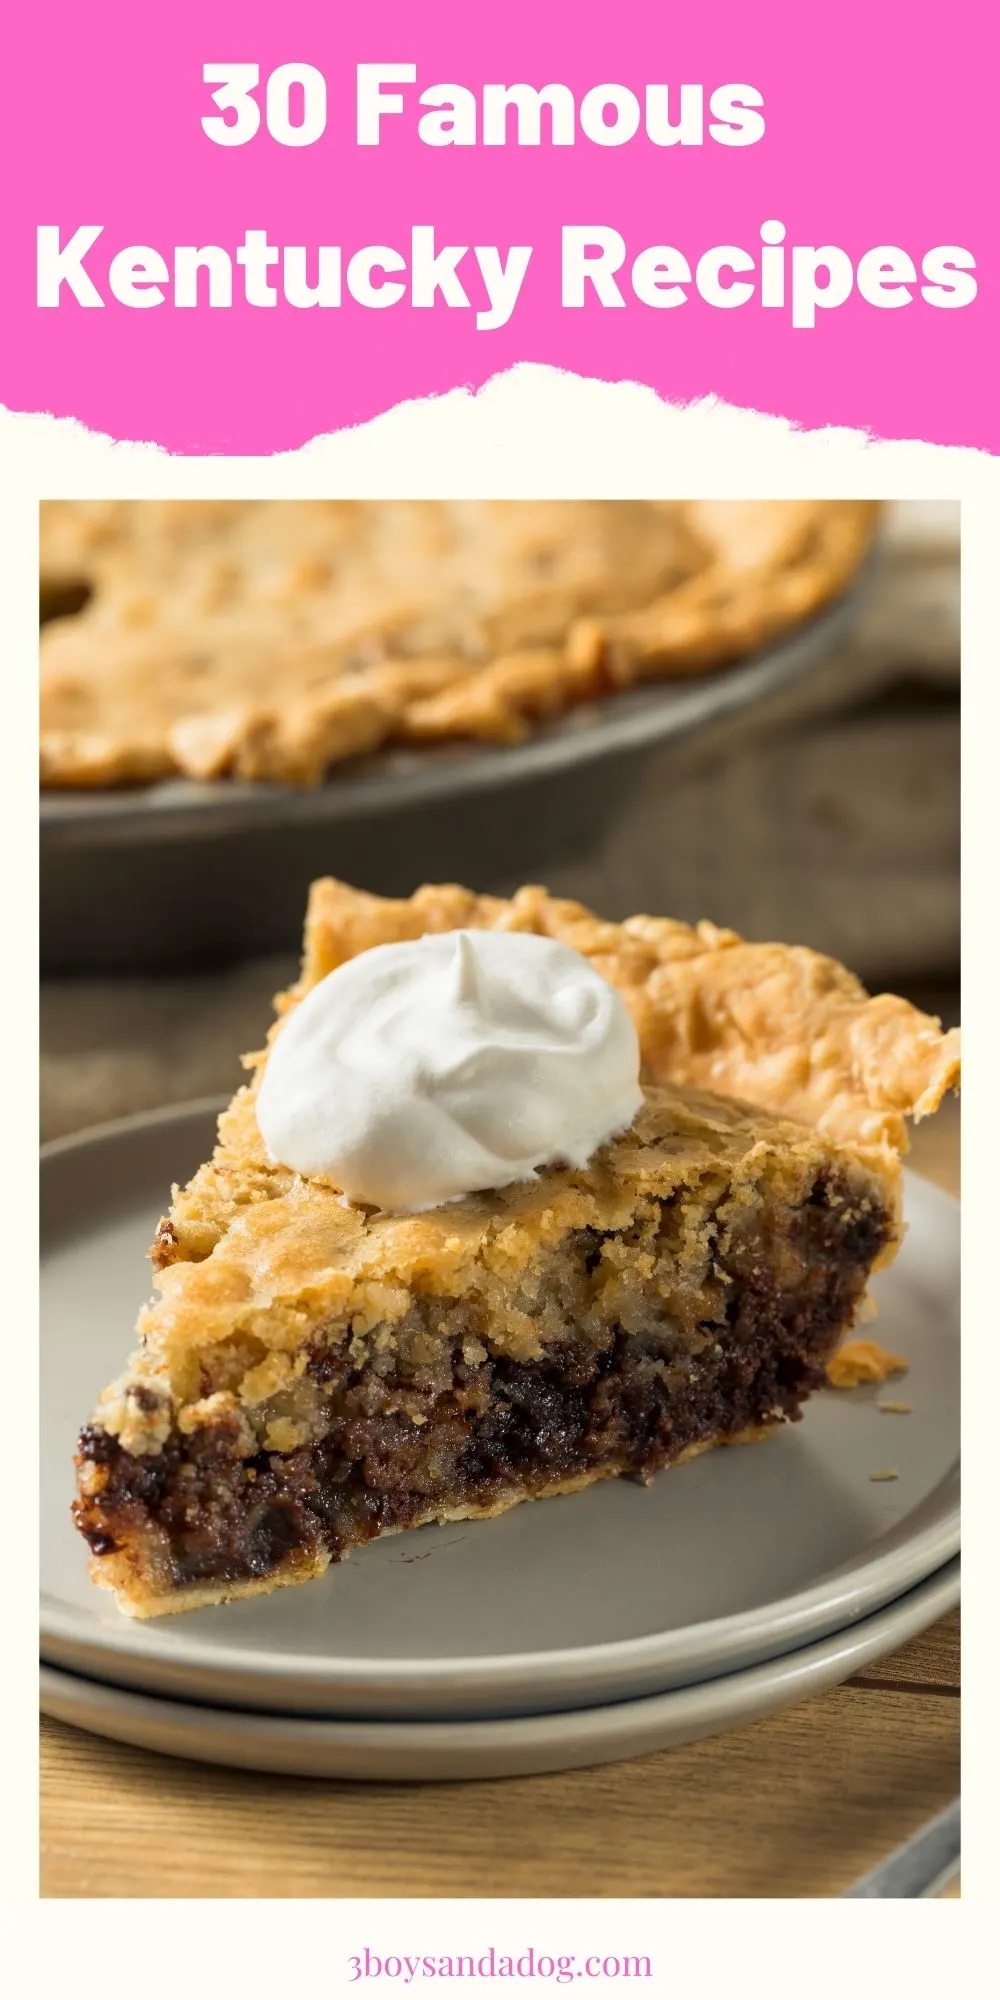 a pin image of pie with 30 famous Kentucky recipes